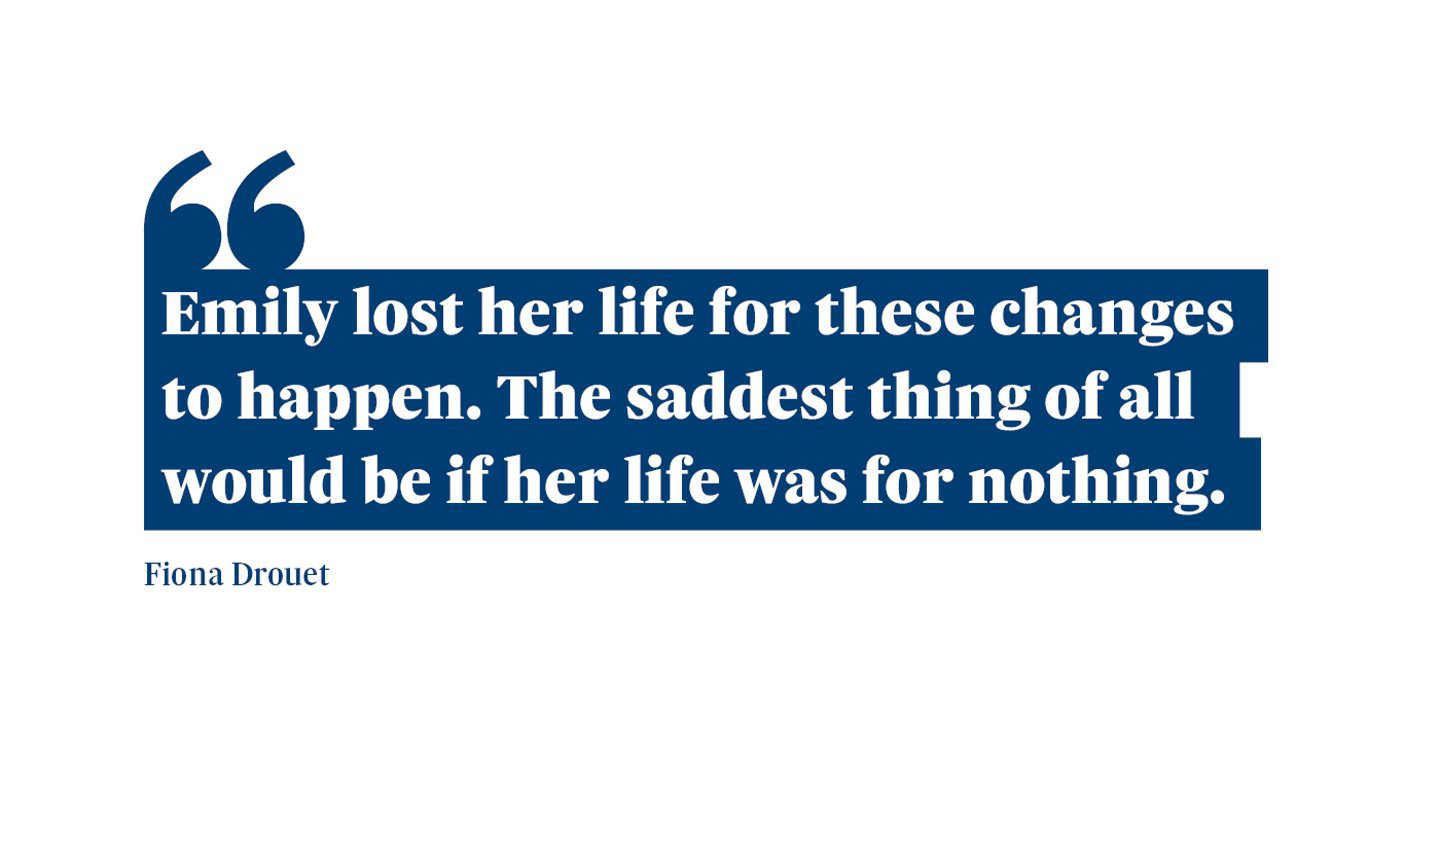 A quote from Fiona Drouet which says: “Emily lost her life for these changes to happen. The saddest thing of all would be if her life was for nothing.”